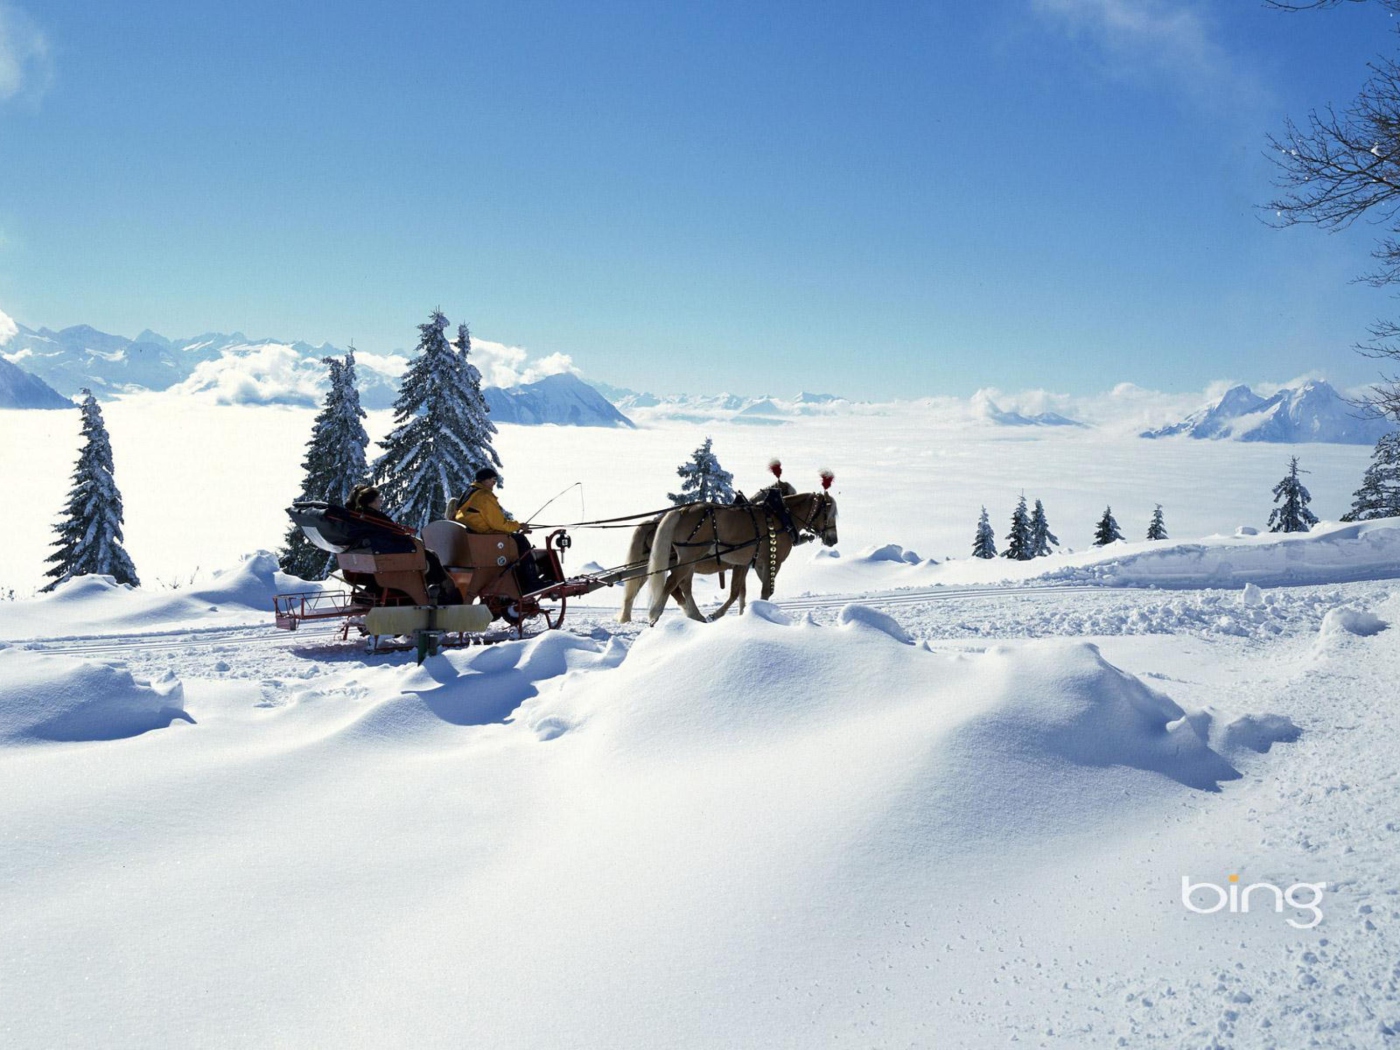 Winter Snow And Sleigh With Horses wallpaper 1400x1050